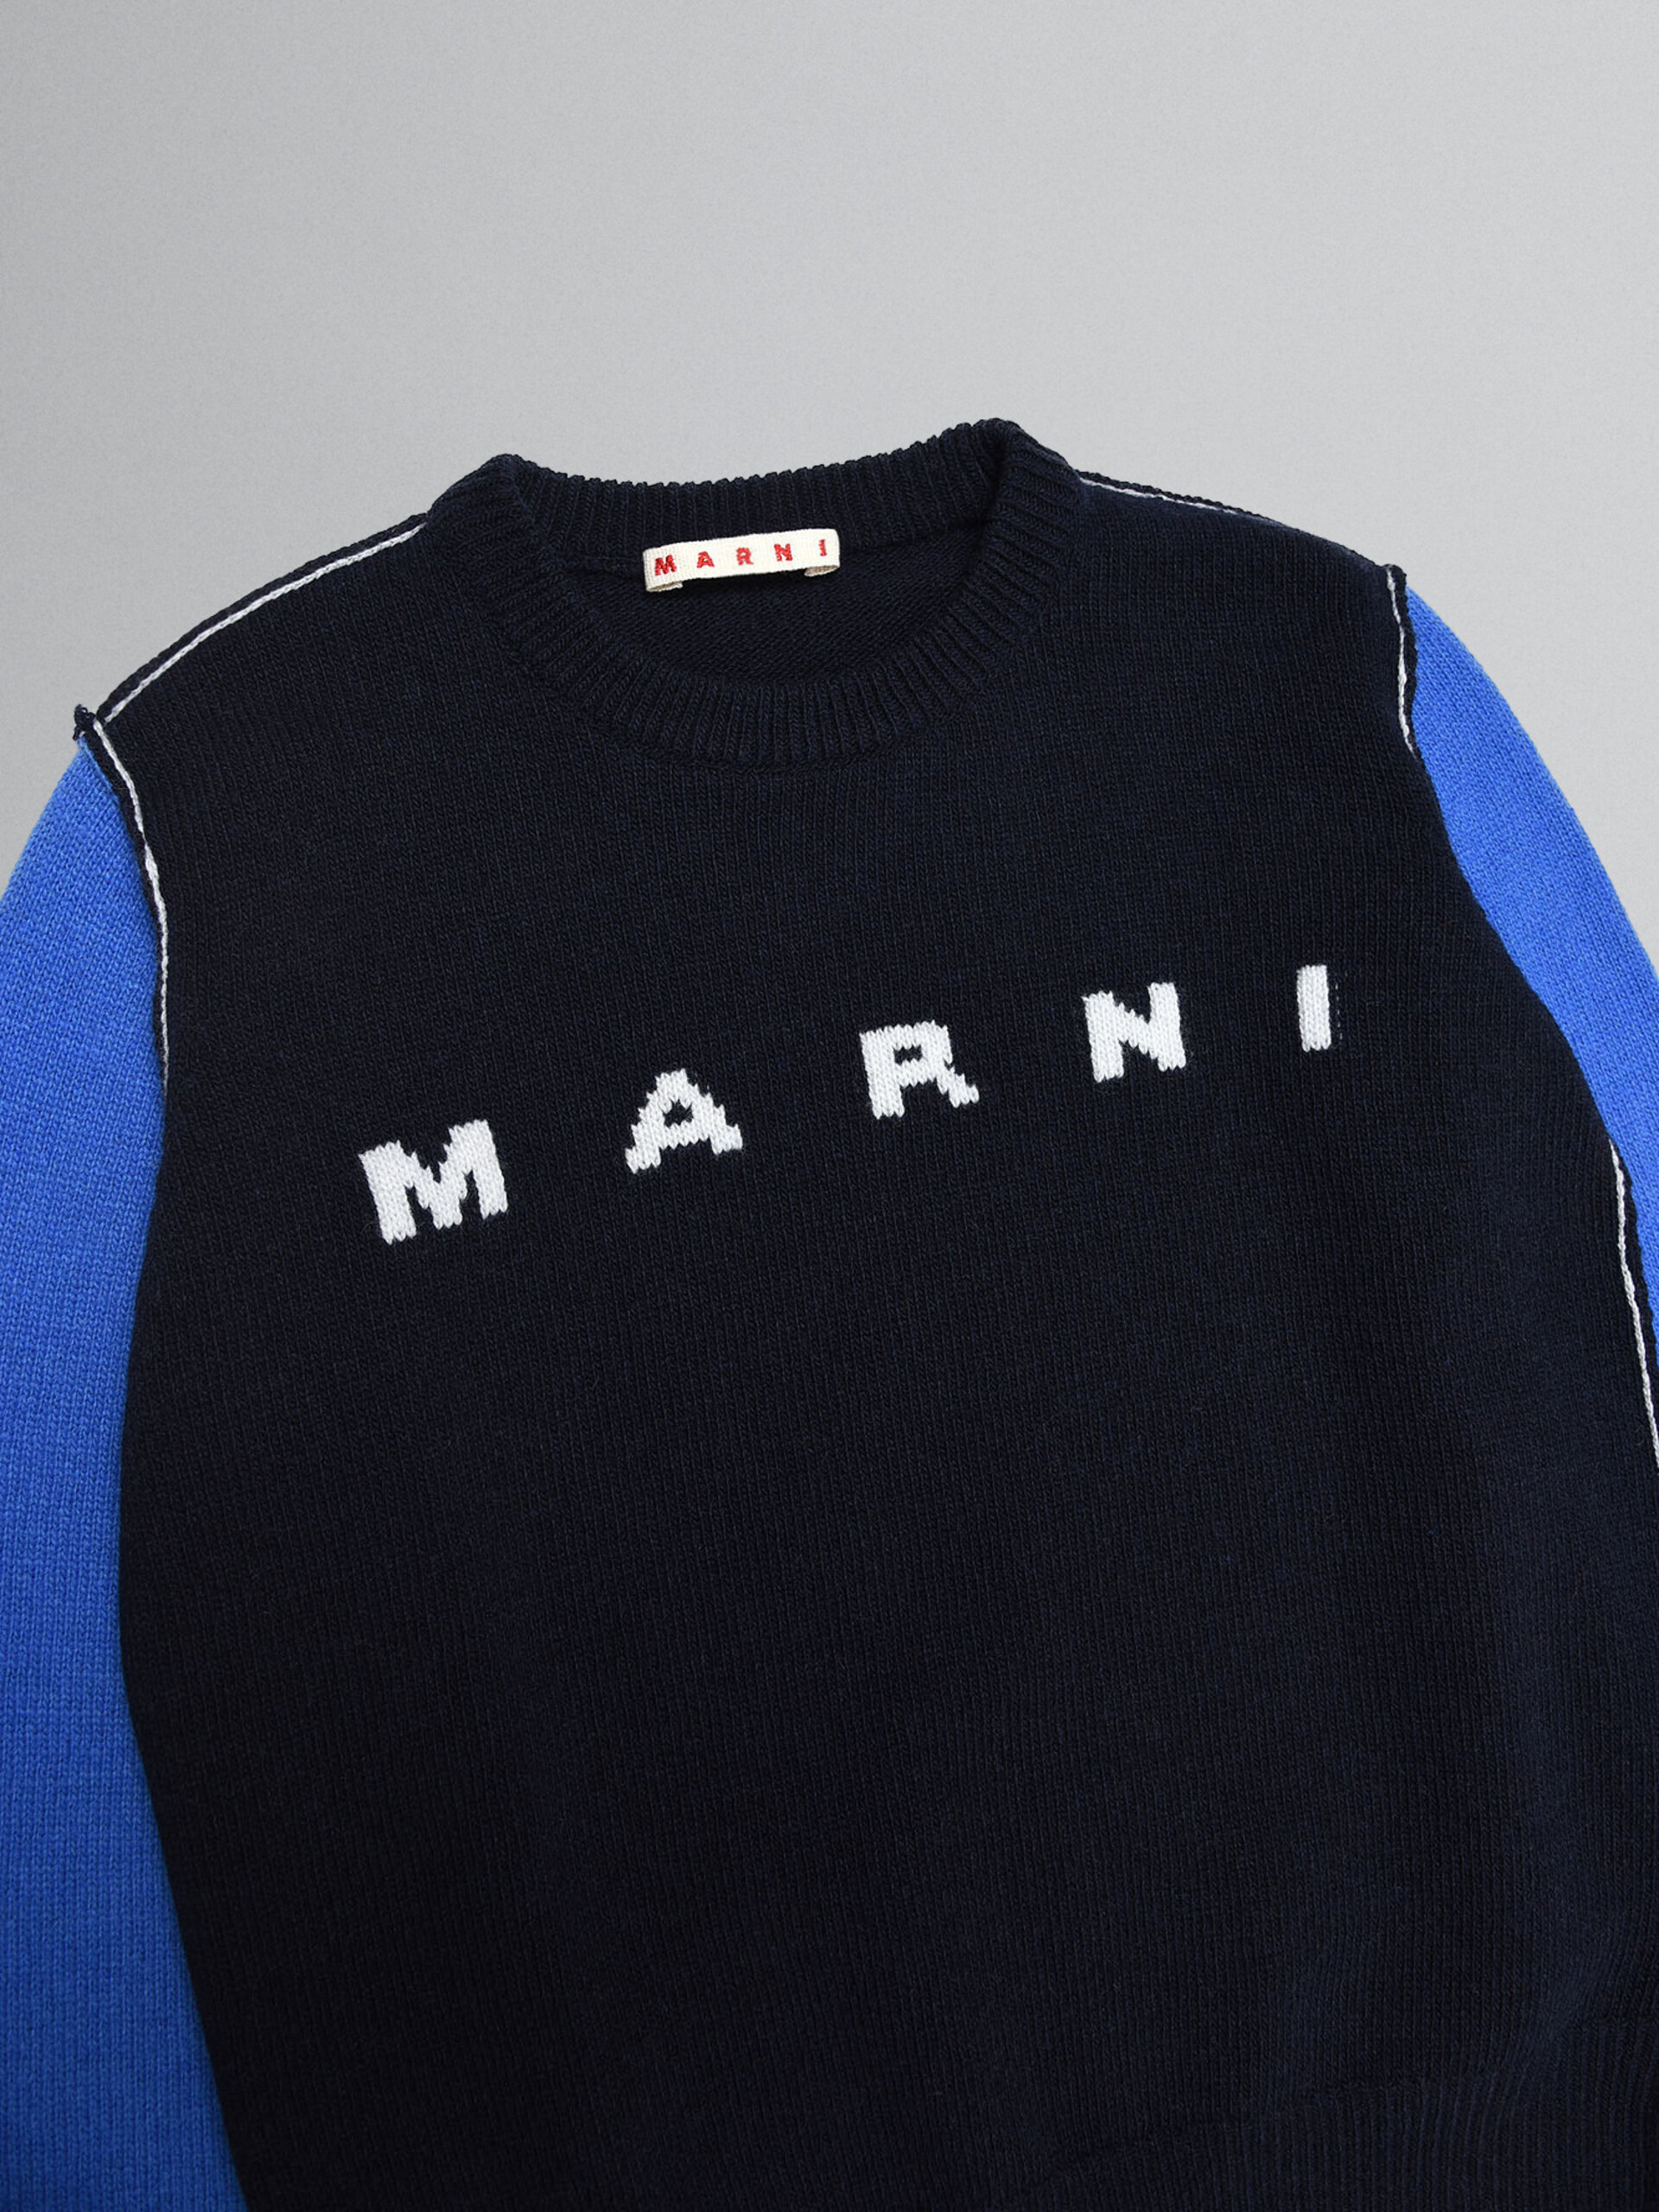 Black knitted sweater with "Marni" intarsia - Knitwear - Image 3